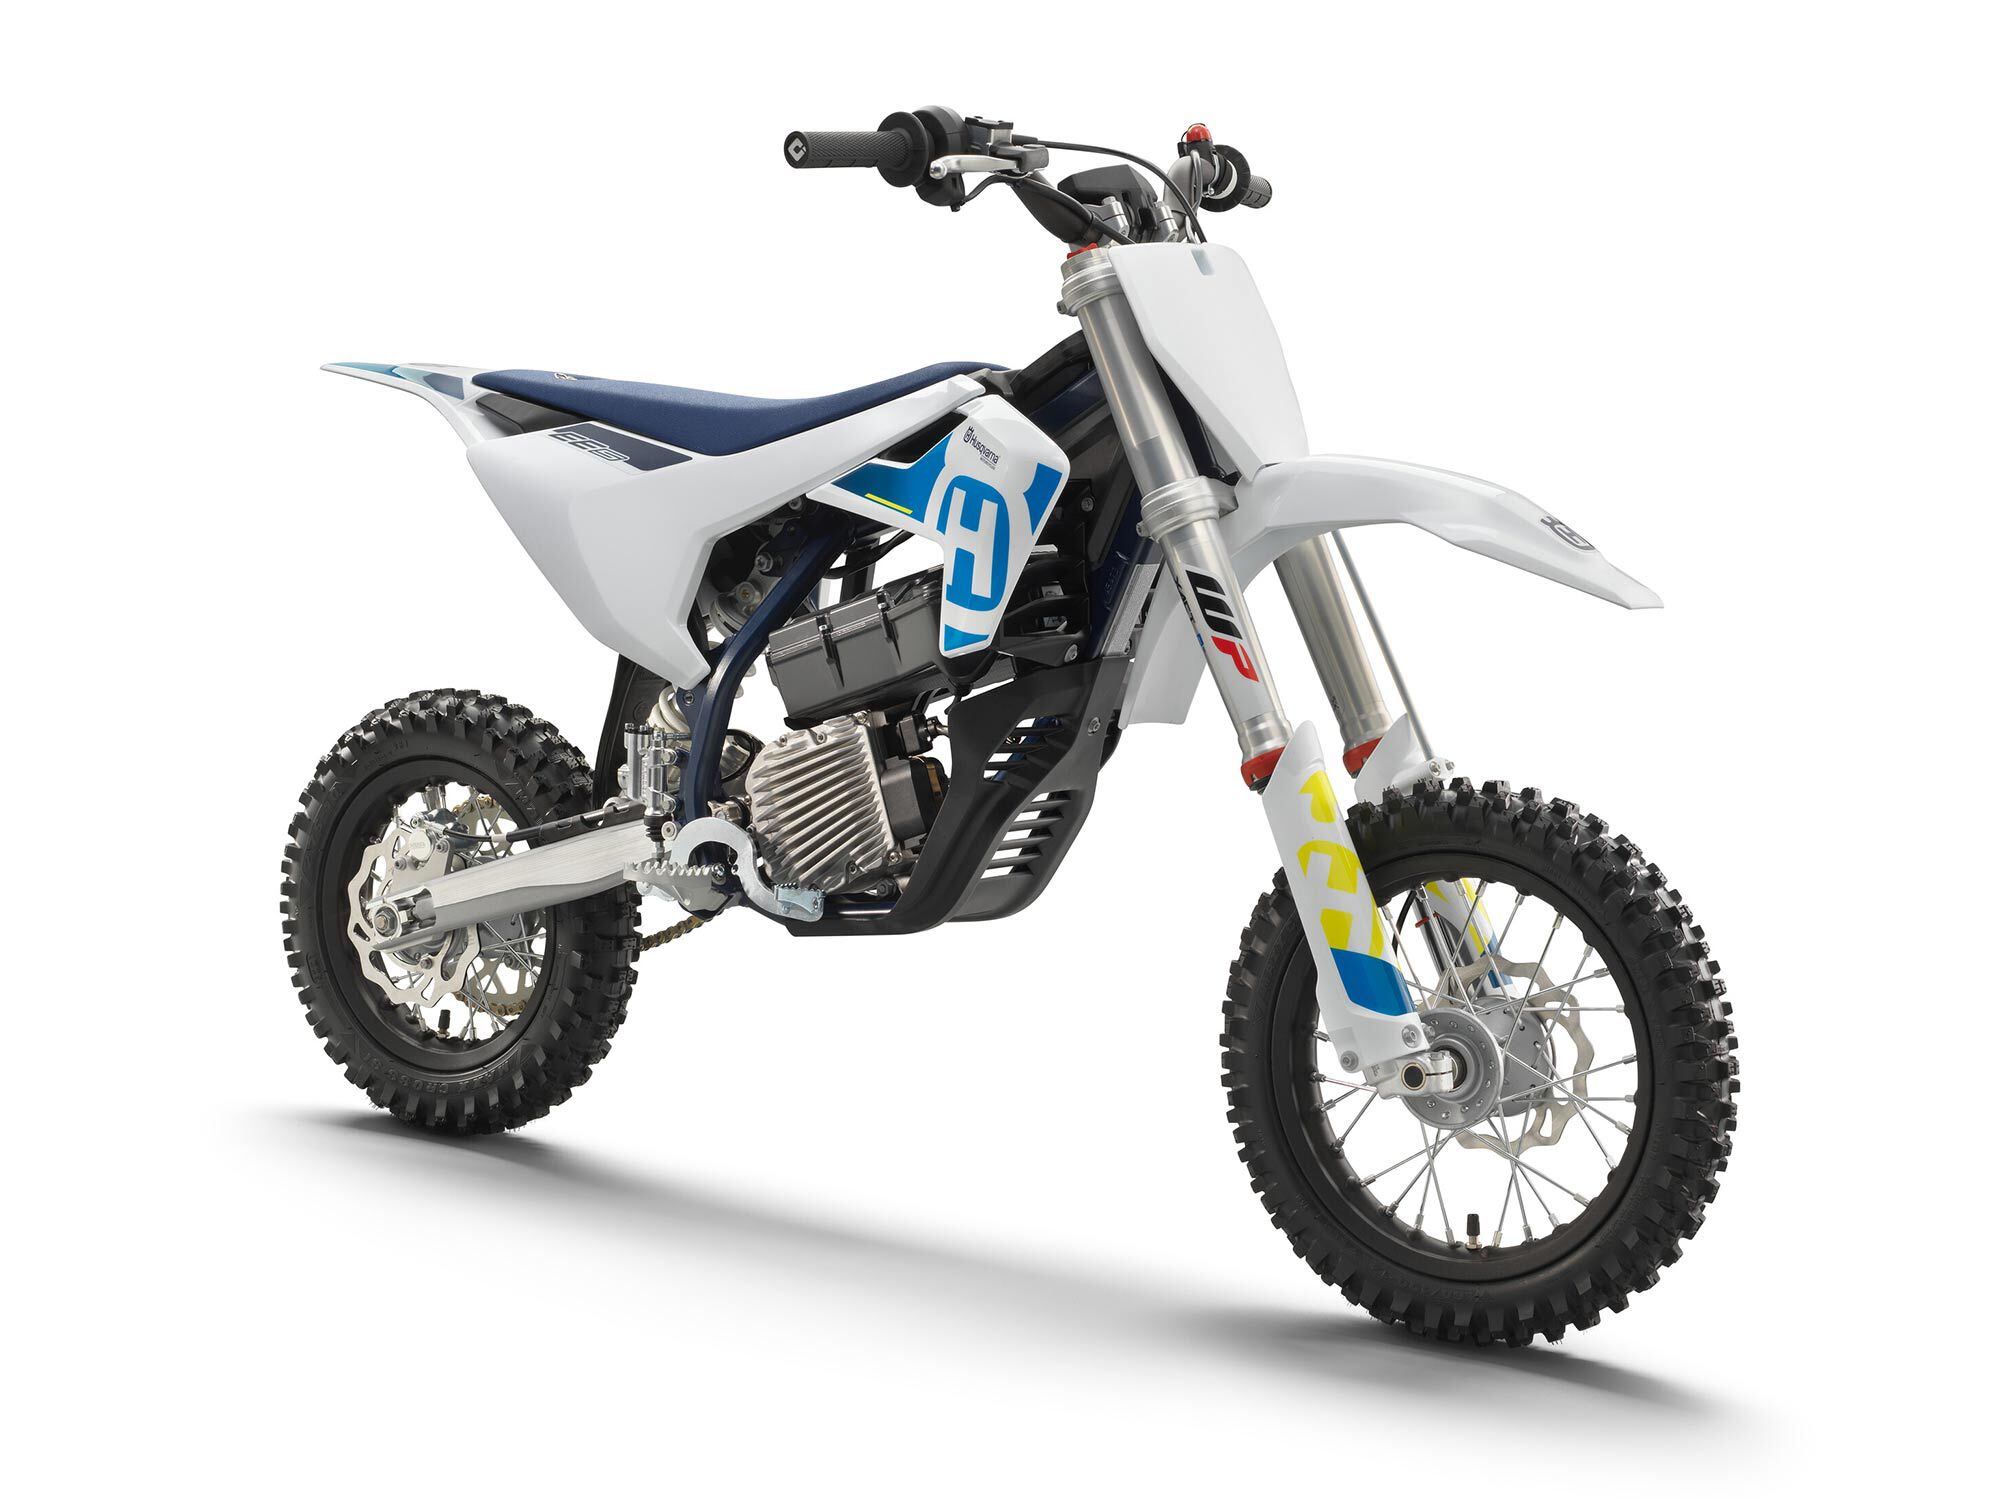 The 2023 Husqvarna EE 5 electric motorcycle for kids will start at $5,549.